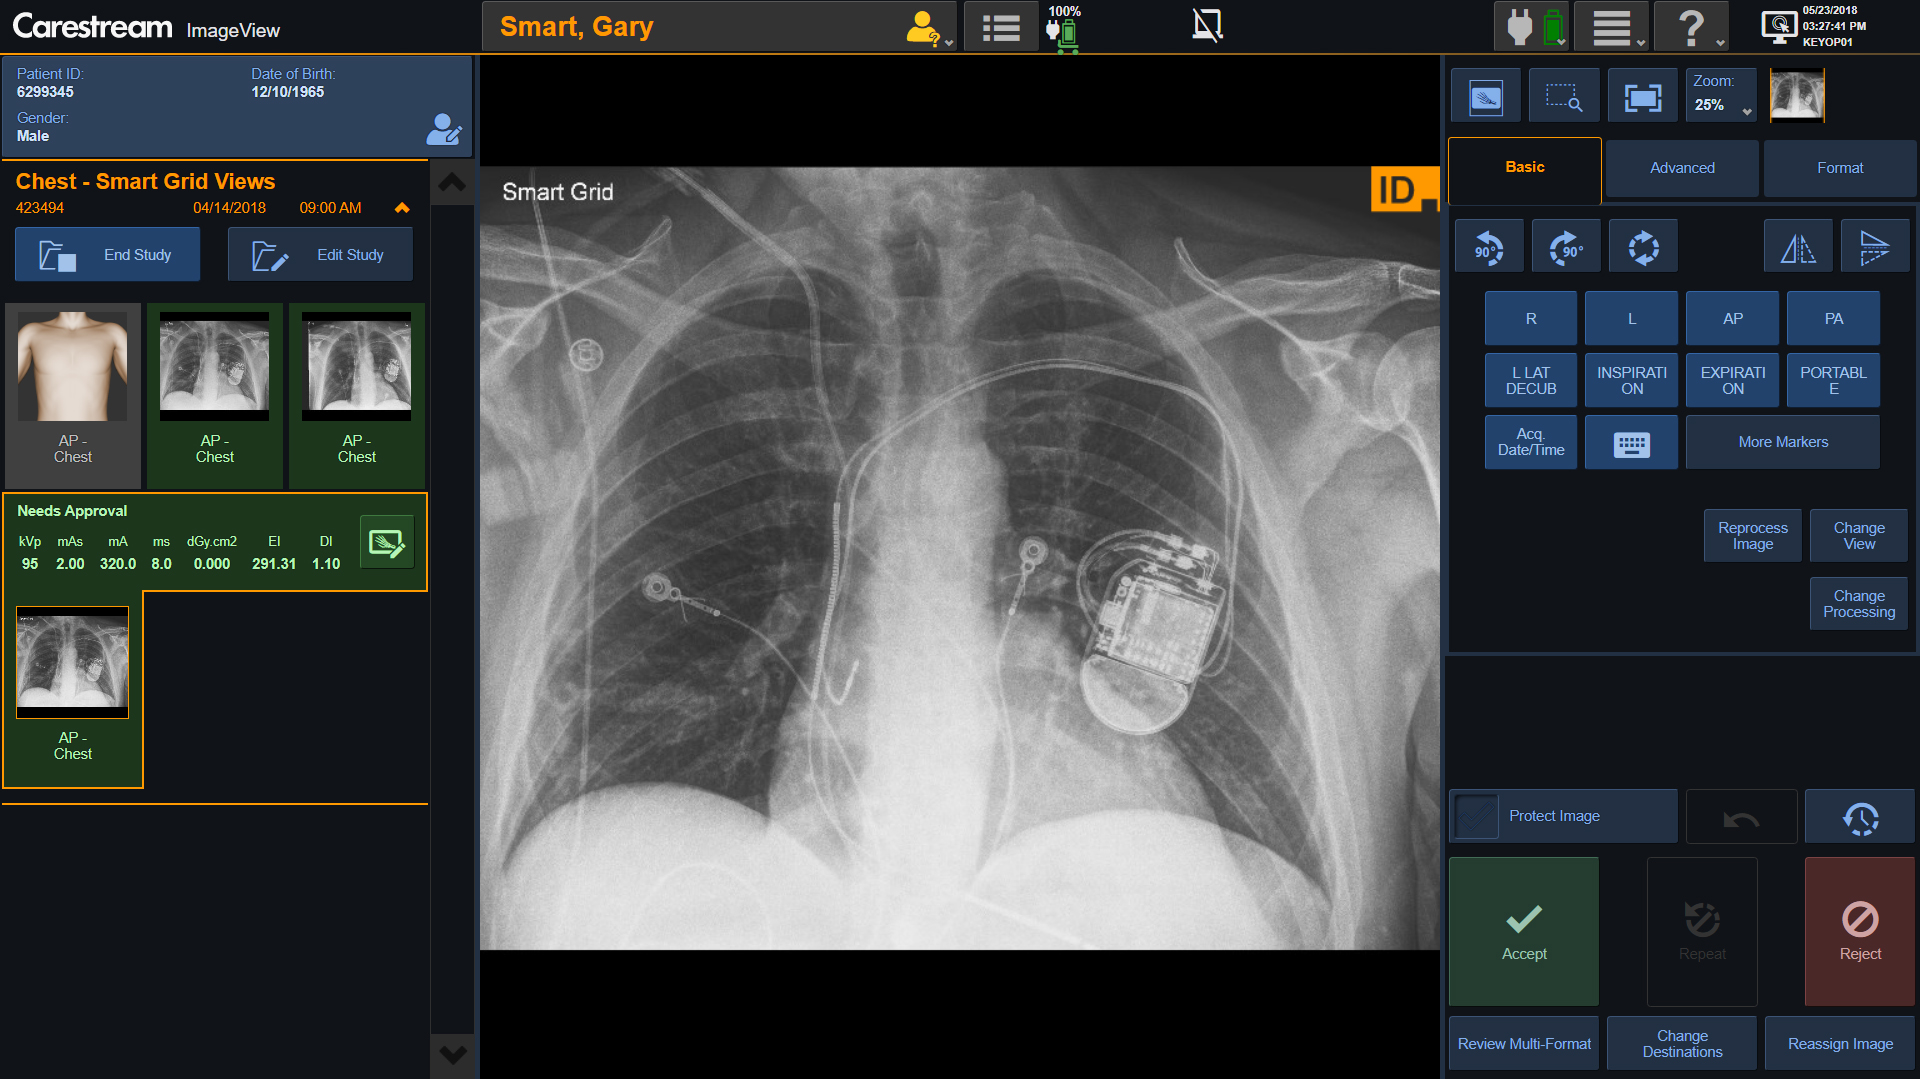 Carestream Releases ImageView Software for DRX-Revolution Mobile X-ray System